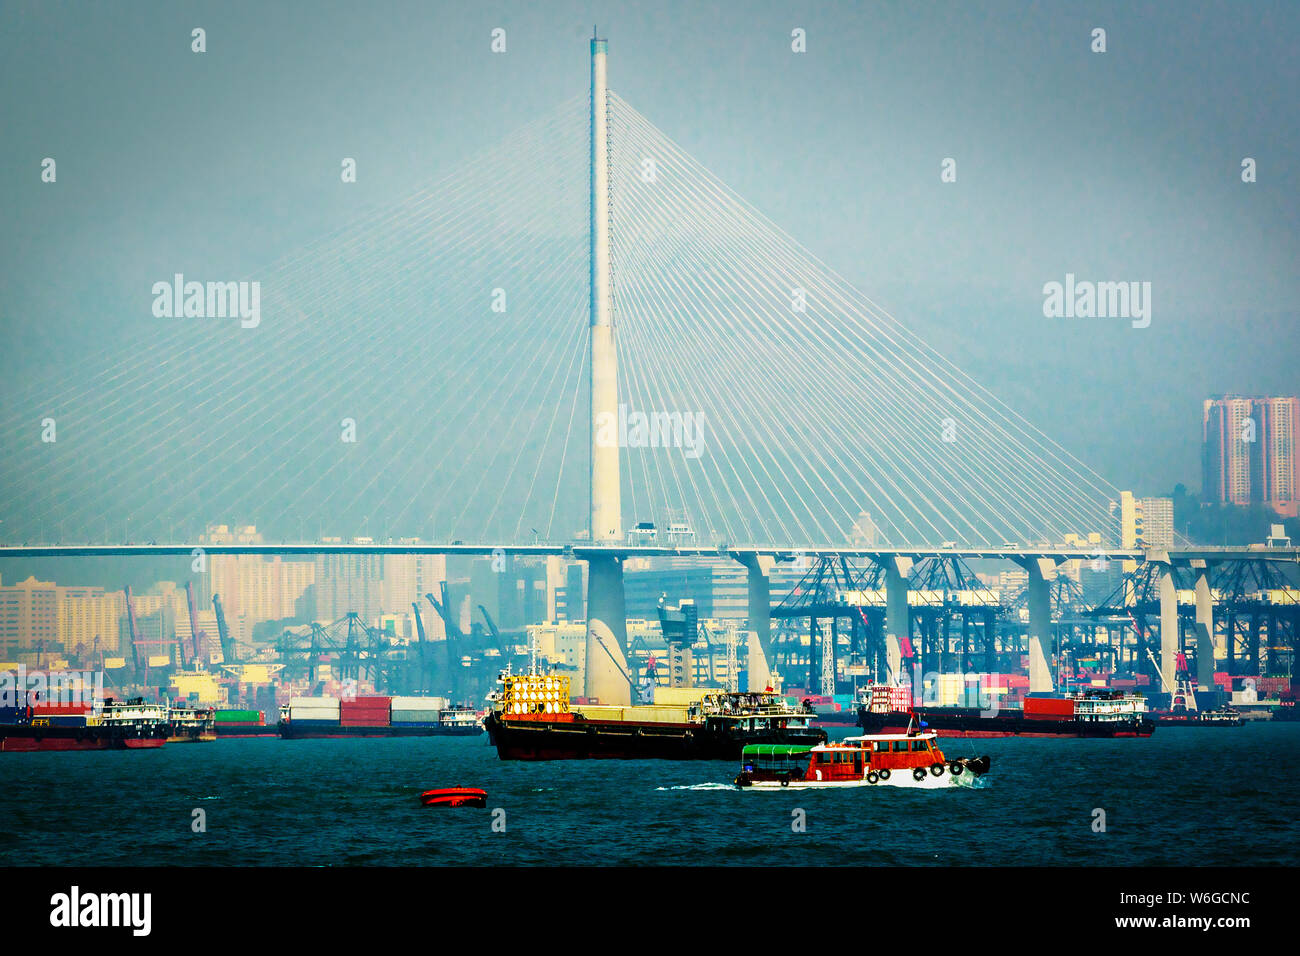 Scenic view of Tsing Ma Bridge in Hong Kong.  Numerous cargo vessels with freight containers. Cityscape of Hong Kong Stock Photo